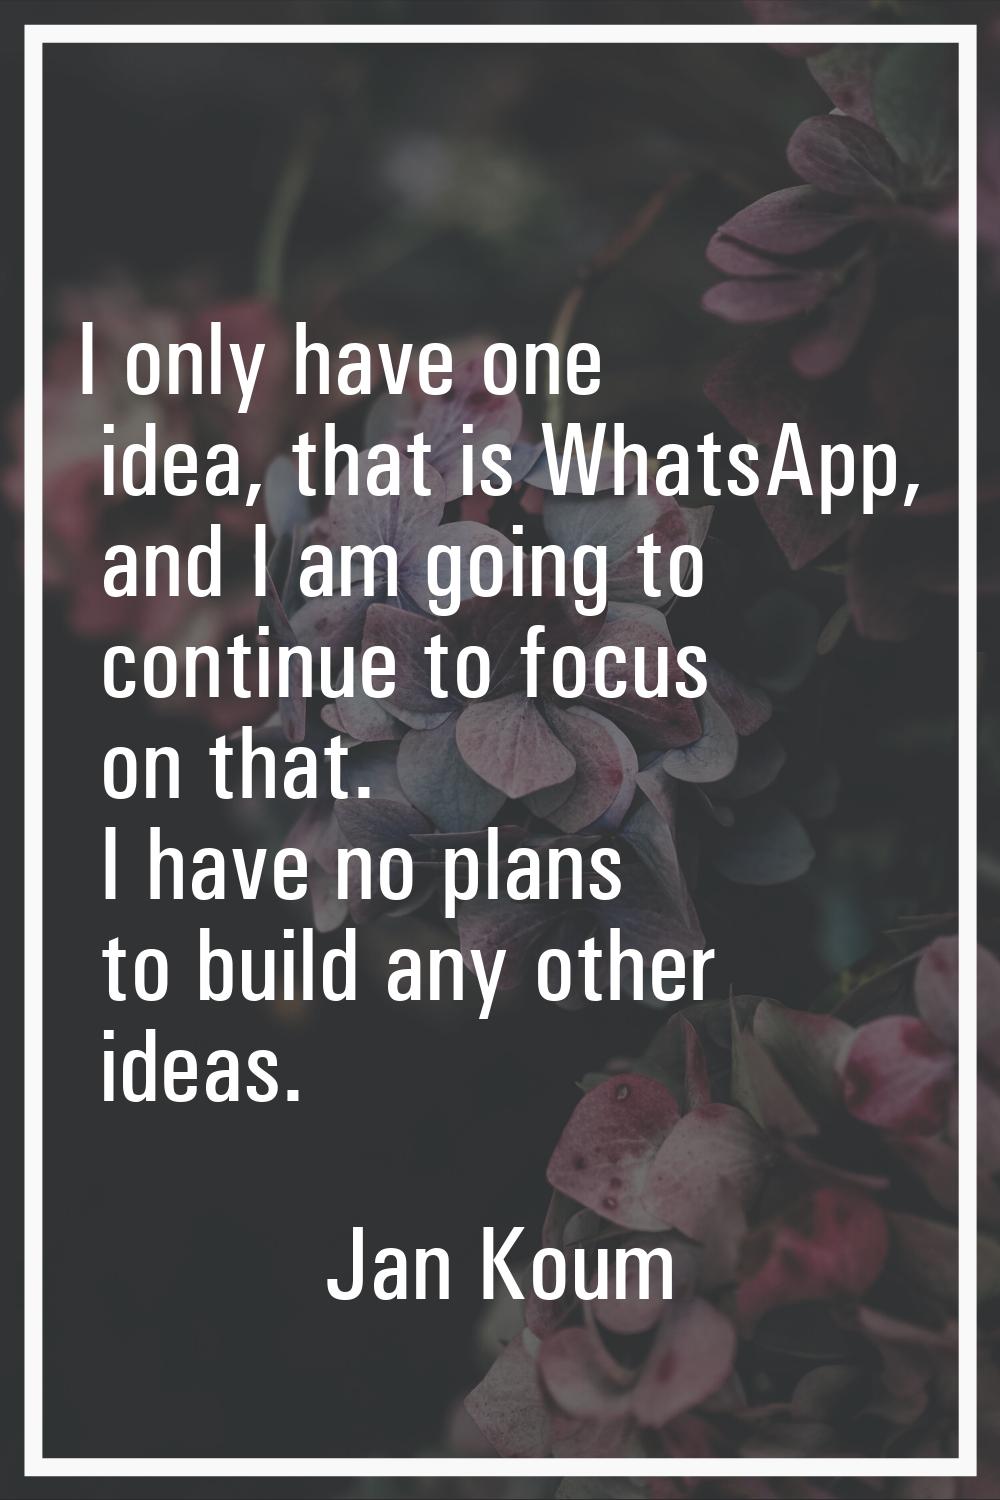 I only have one idea, that is WhatsApp, and I am going to continue to focus on that. I have no plan